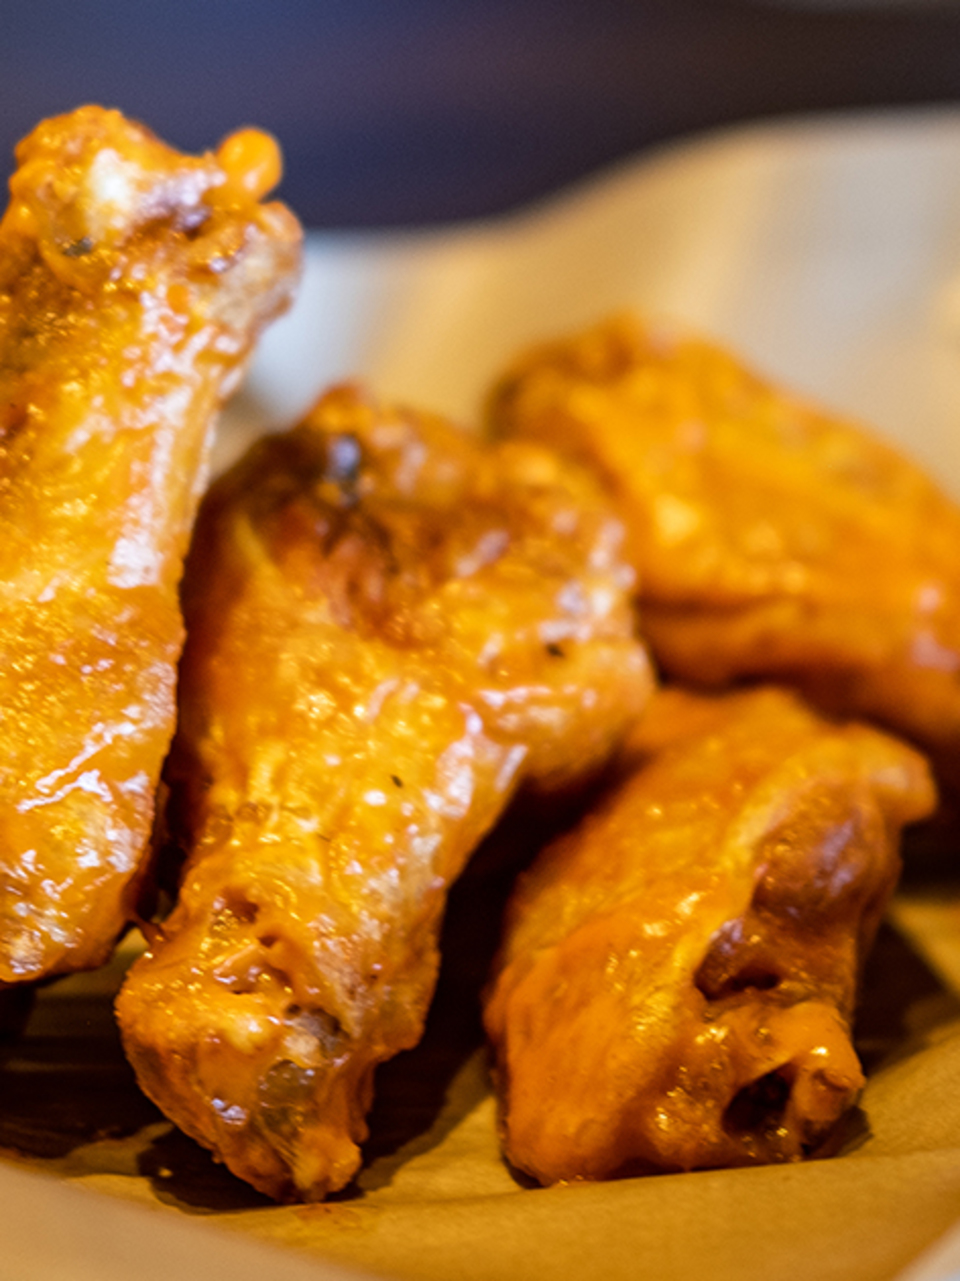 Buffalo Wild Wings To Offer Free Food If Super Bowl Goes Into